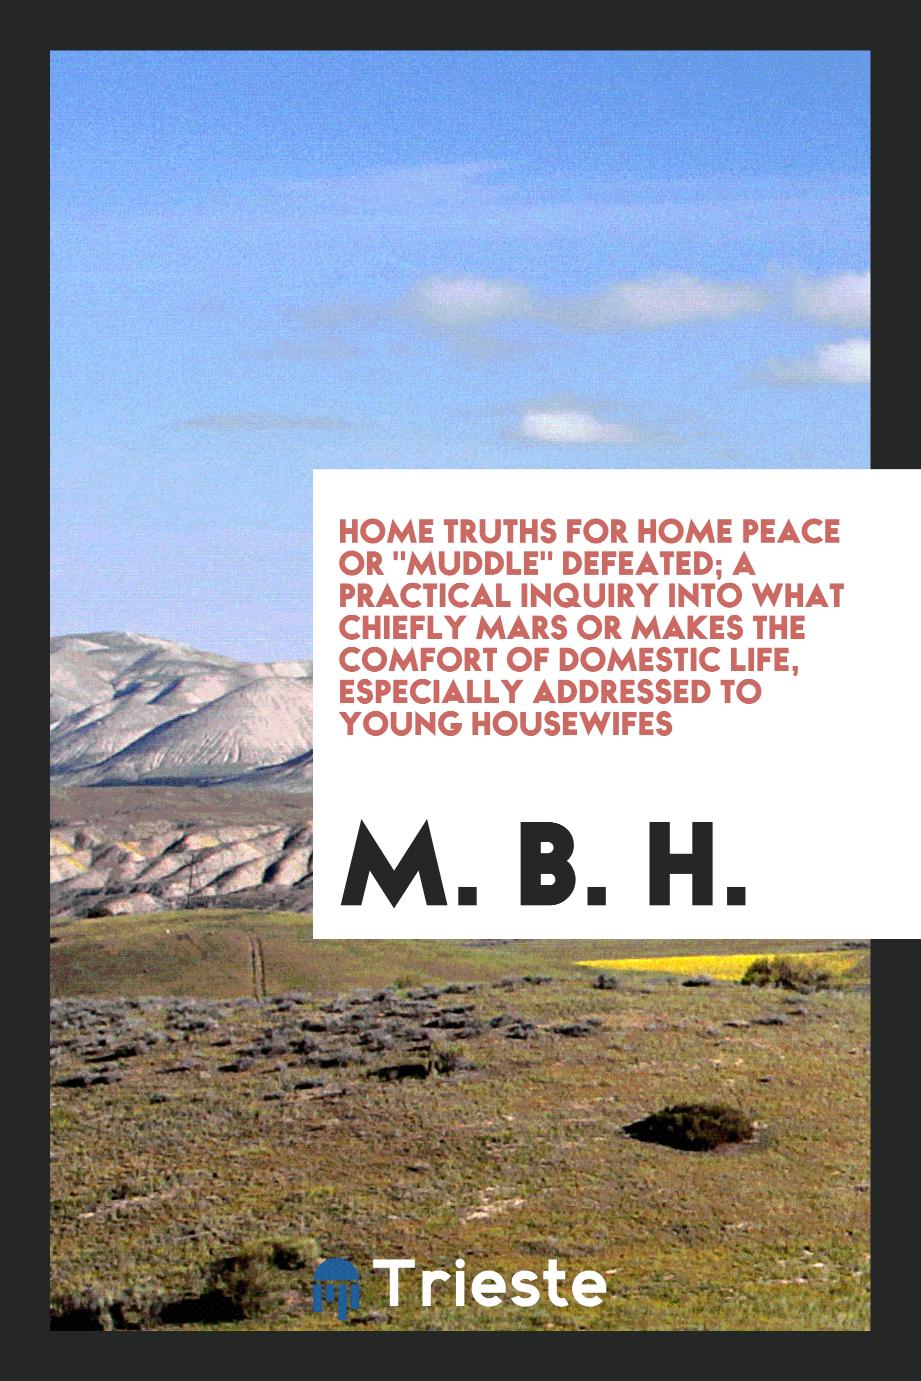 Home Truths For Home Peace Or "Muddle" Defeated; A Practical Inquiry Into What Chiefly Mars Or Makes The Comfort Of Domestic Life, Especially Addressed To Young Housewifes